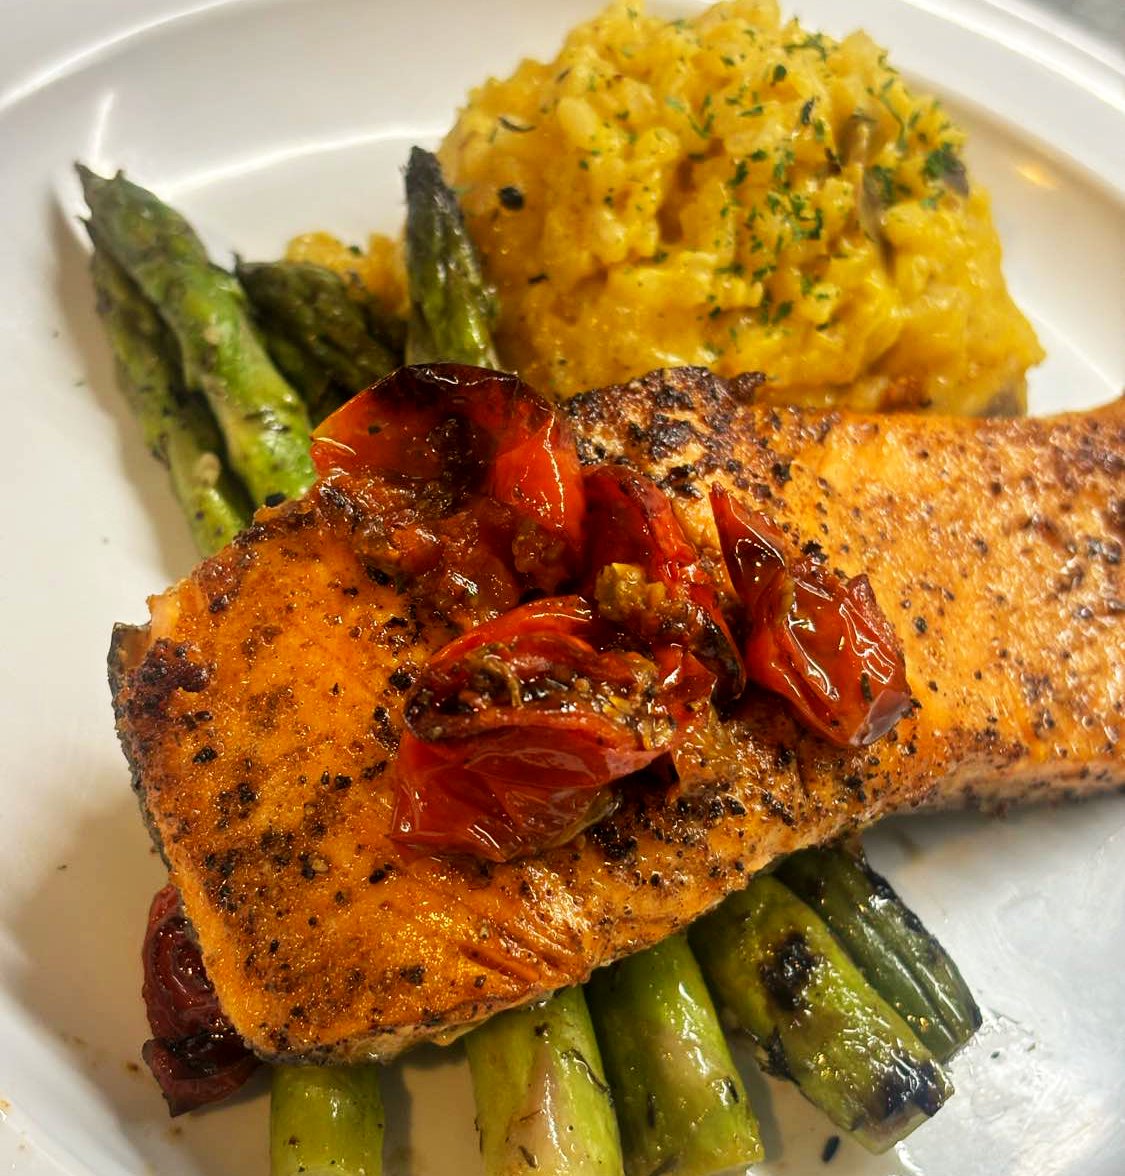 What a feast! Beautiful pan-seared salmon, mushroom risotto, grilled asparagus, and a blistered cherry tomato garnish served to our clients at Healing Springs Ranch.  

#FromtheFieldFriday #foodservice #foodmanagement #culinaryservices #culinaryservicesgroup